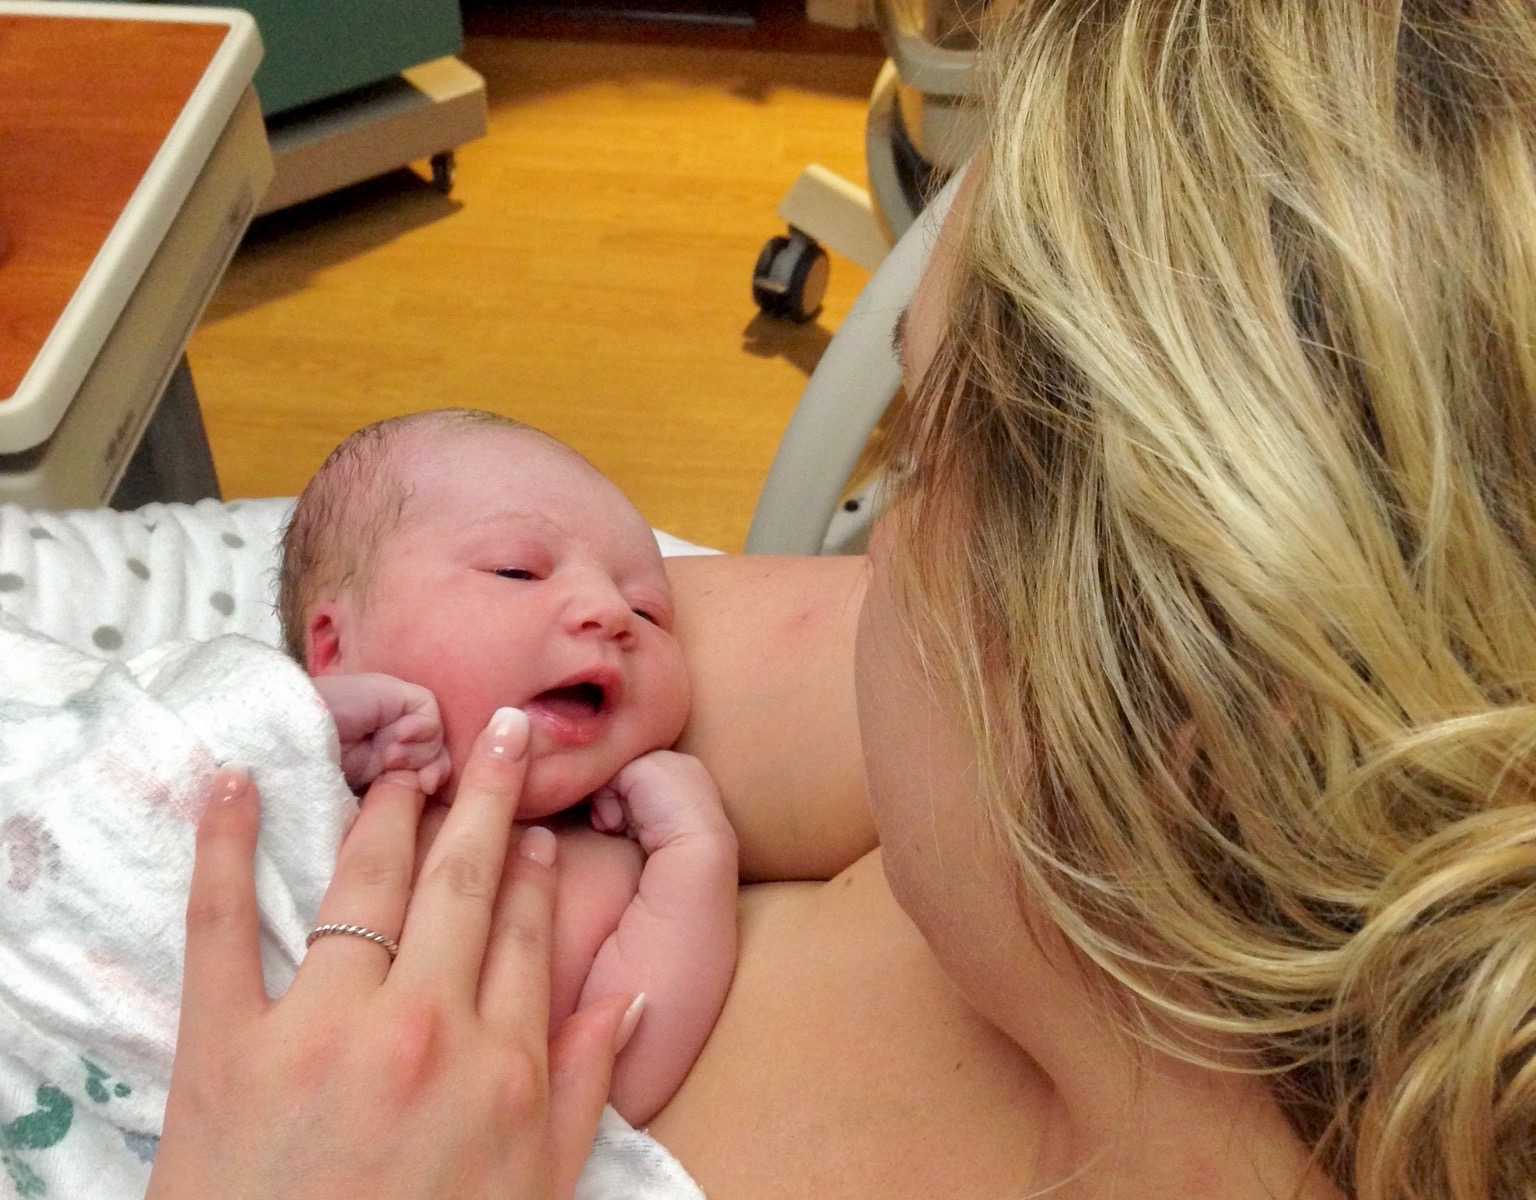 Woman with postpartum thyroid condition looks down at newborn in her arms